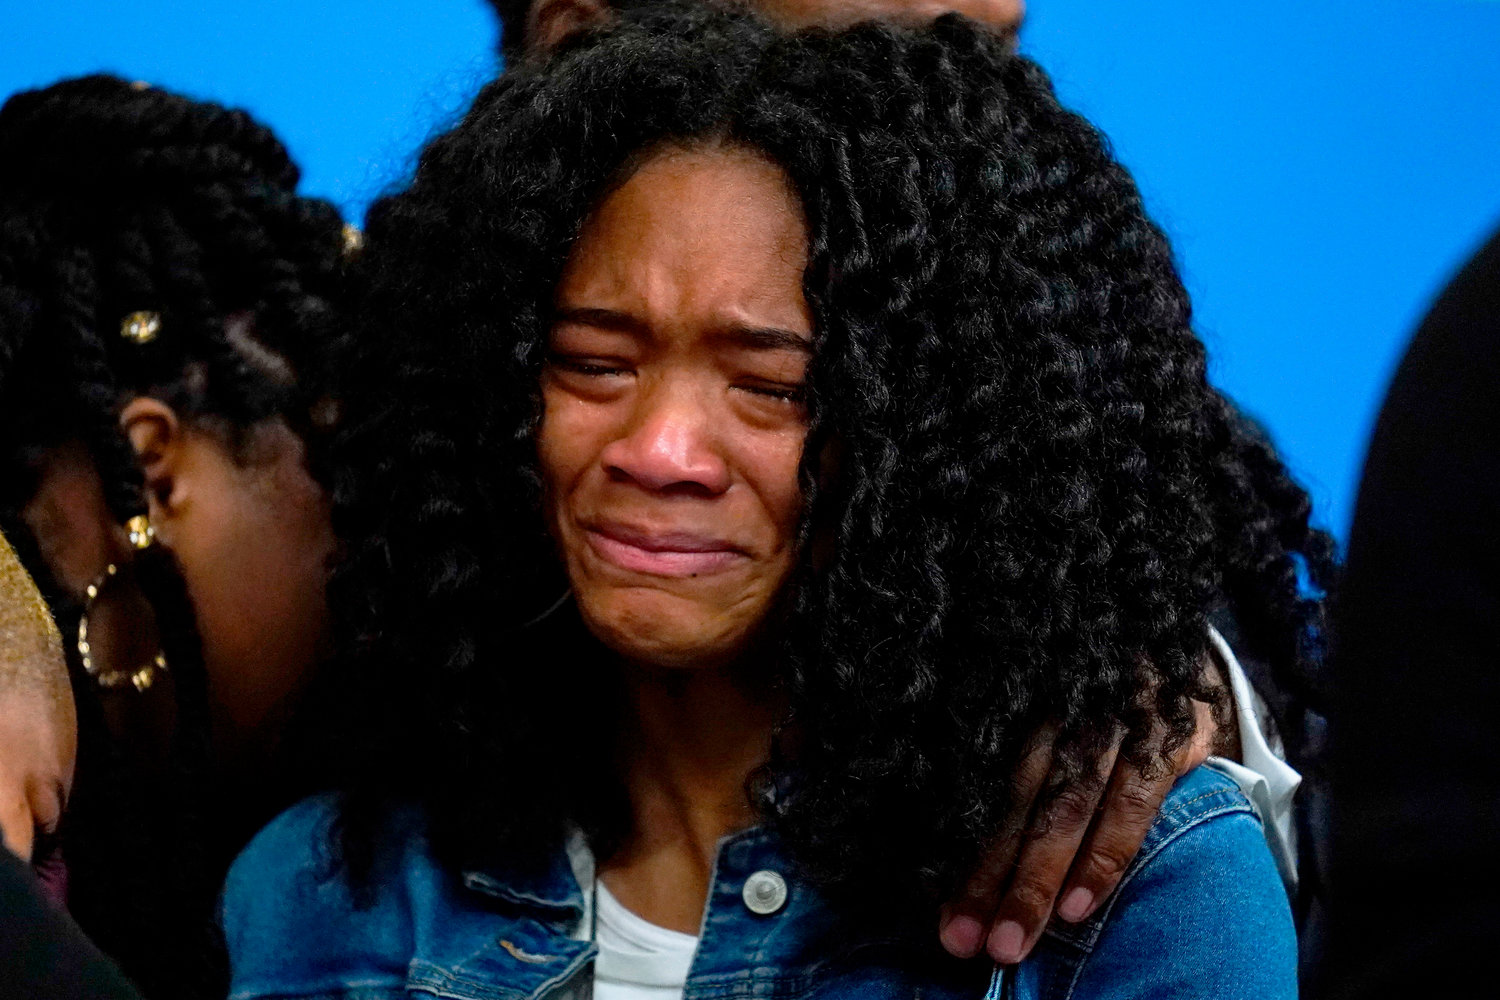 Lauren Gibson, a great granddaughter of Ruth Whitfield, a victim of shooting at a supermarket, is overwhelmed with emotion during a news conference in Buffalo, N.Y., Monday, May 16, 2022. (AP Photo/Matt Rourke)